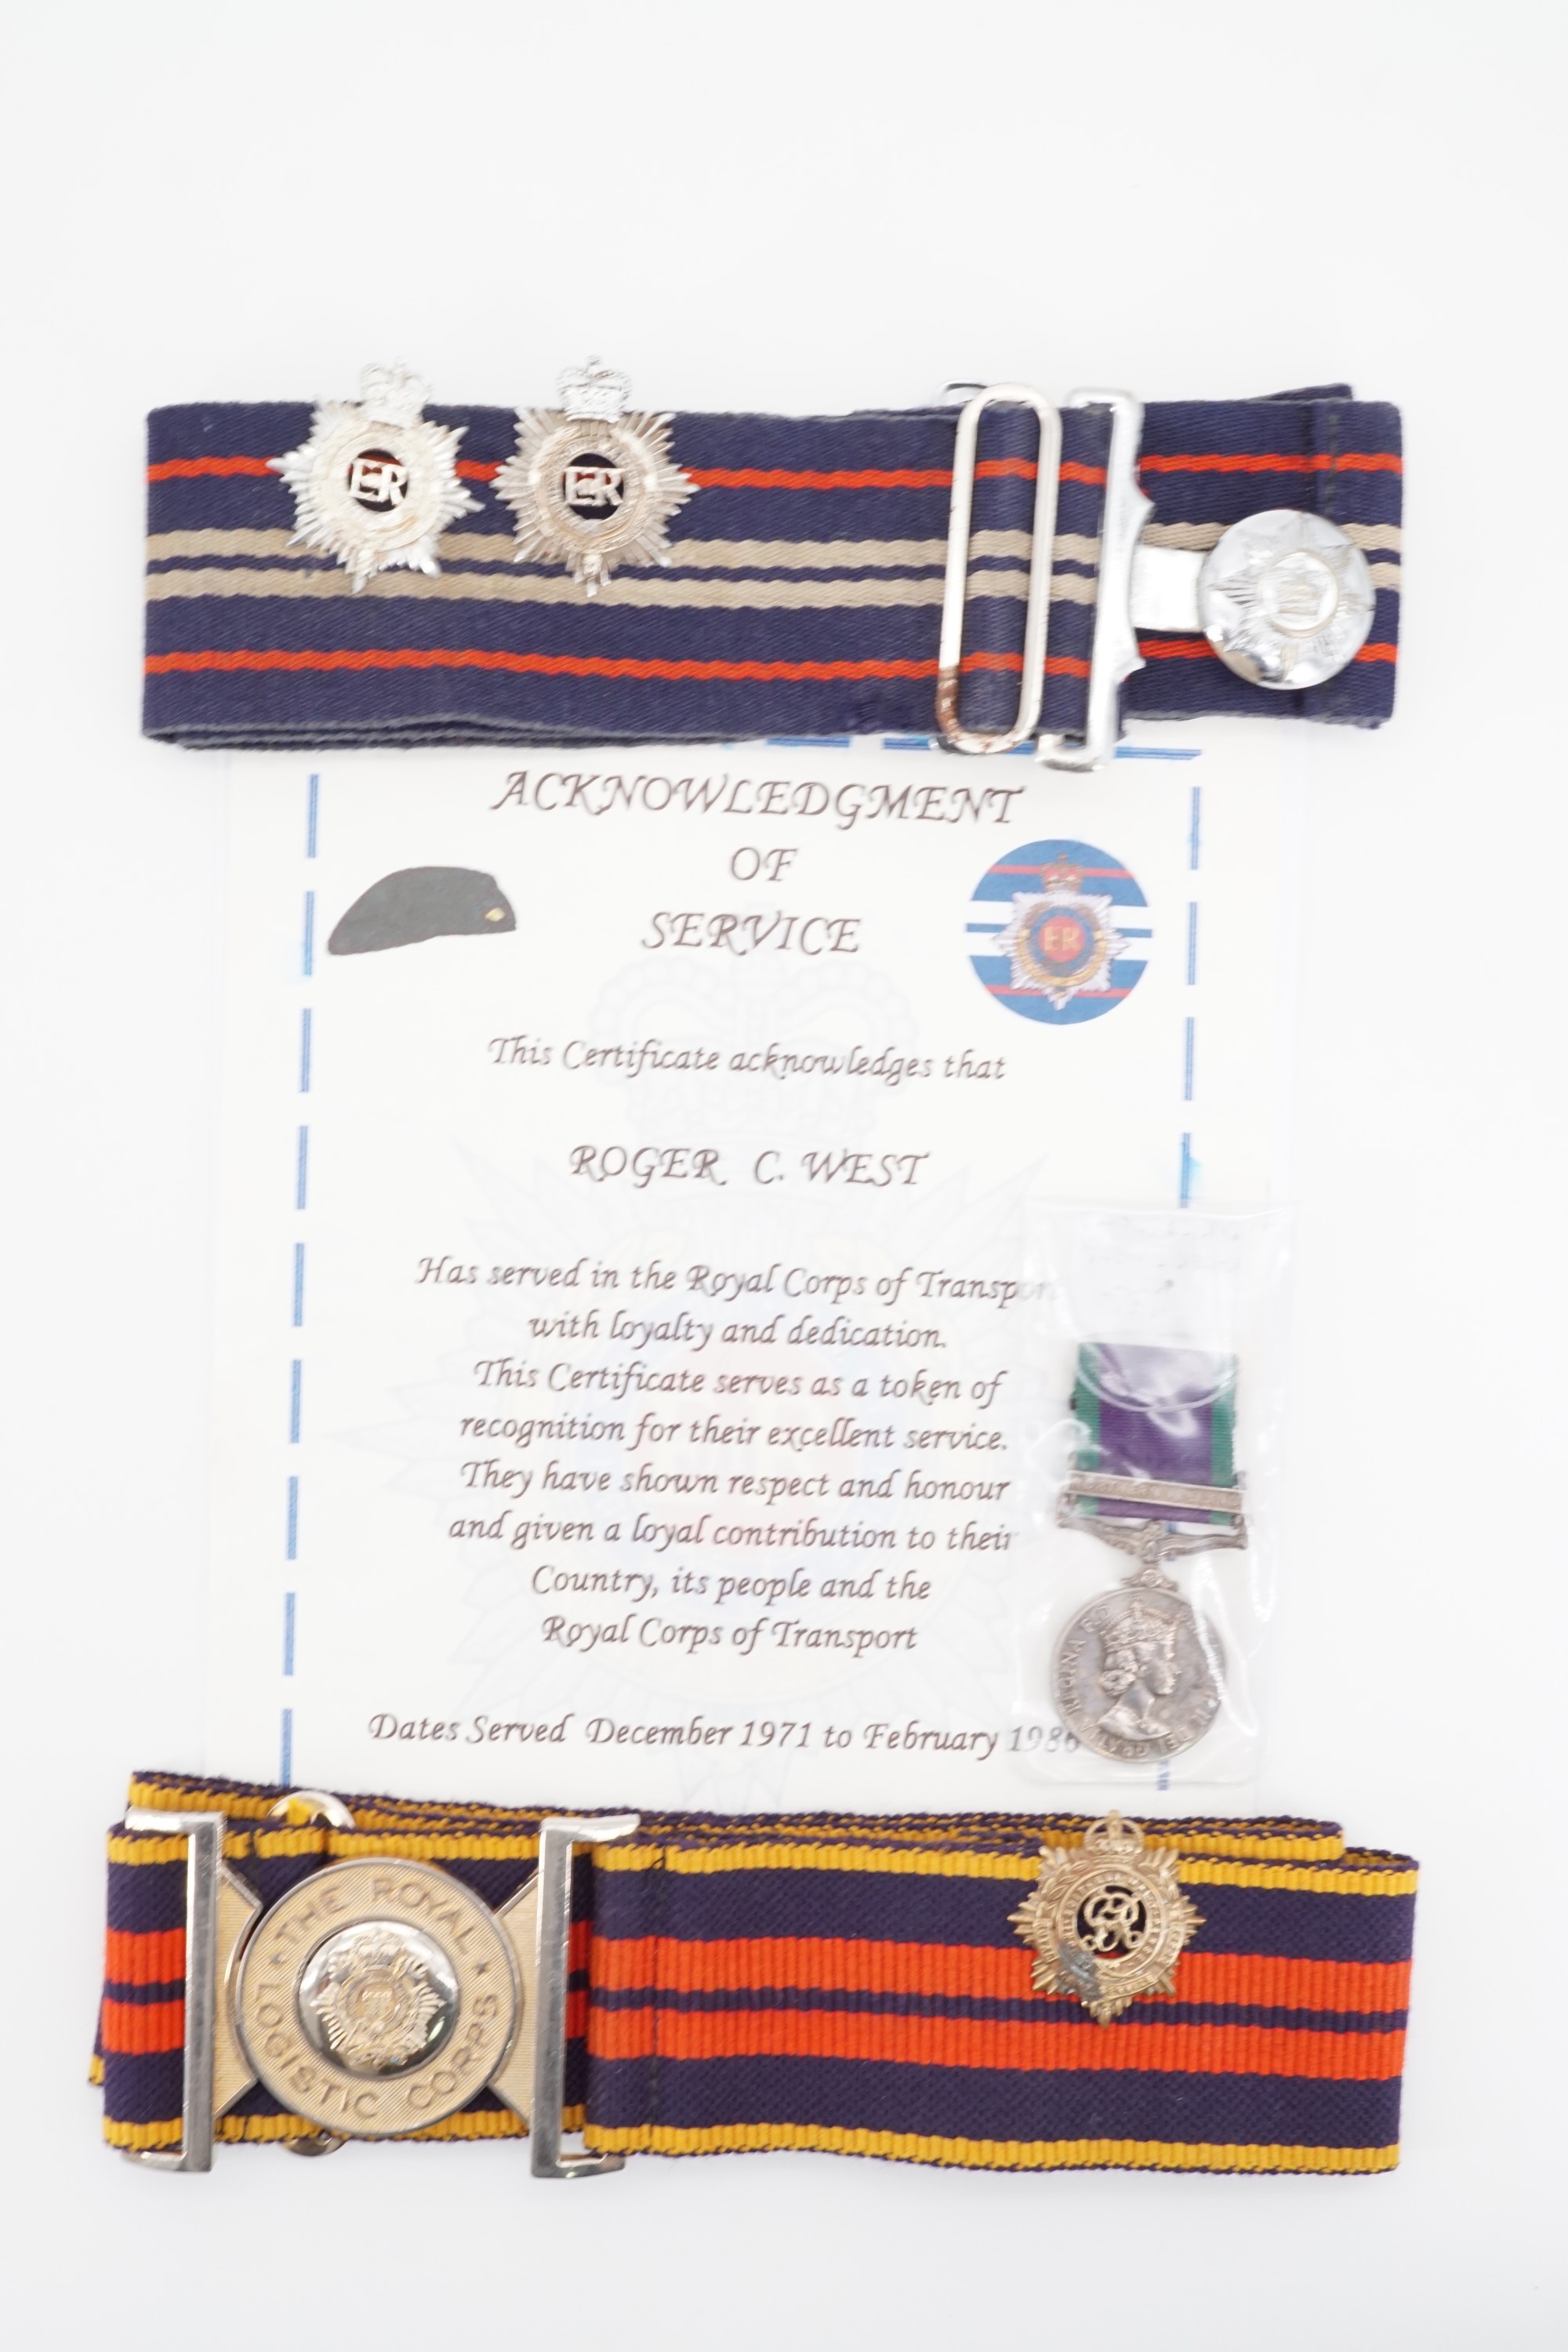 A QEII Campaign Service Medal with Northern Ireland clasp to 24250117 Dvr R C West, RCT, together